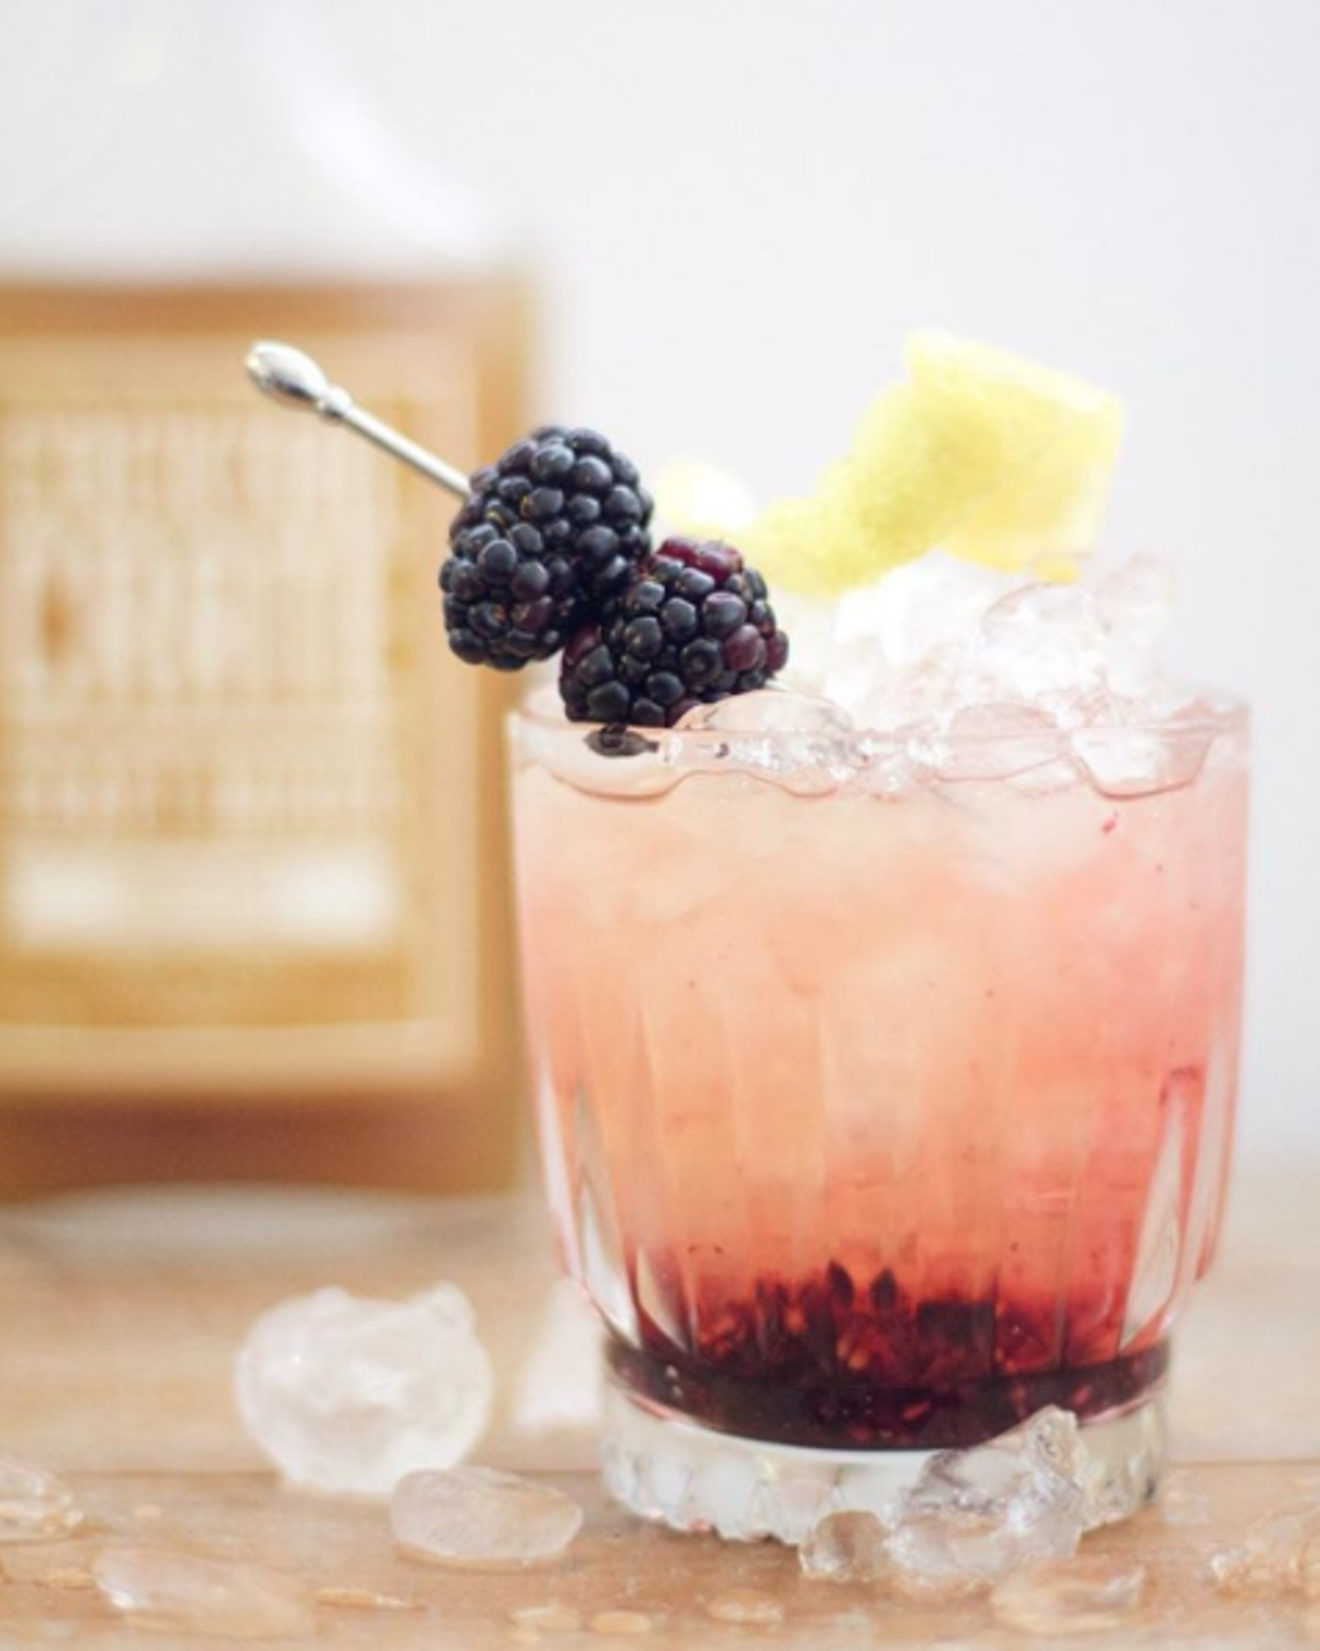 Need some drink inspo? Apartment Bartender features drinks featuring all kinds of liquors.